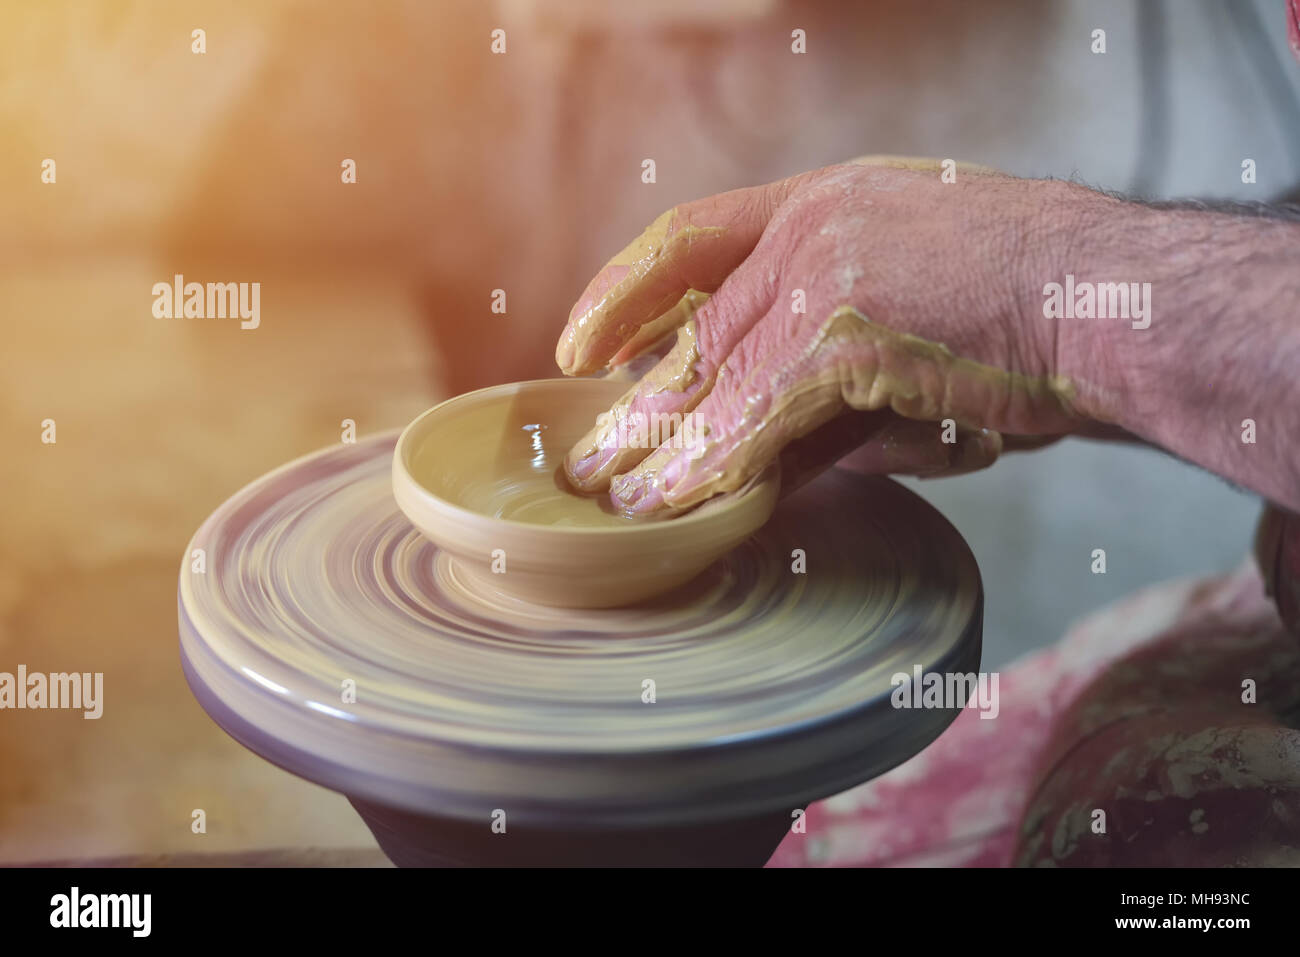 Creating a jar or vase of white clay close-up. Man hands, pottery, workshop, ceramics art concept. Twisted potter's wheel Stock Photo